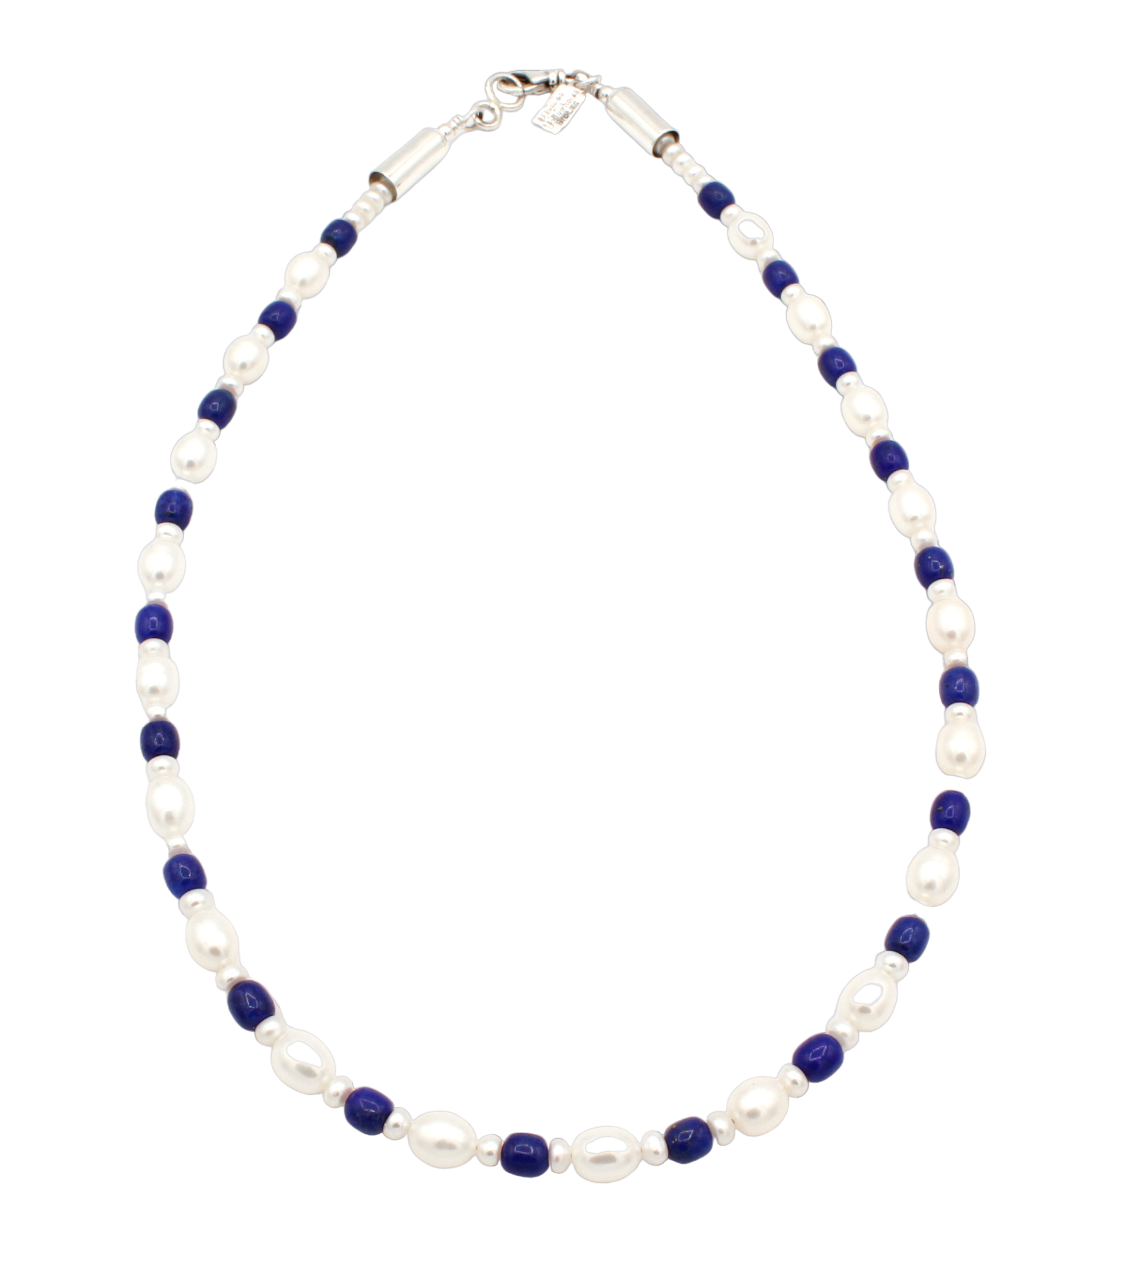 Single Strand Pearl and Lapis Bead Necklace-Jewelry-Artie Yellowhorse-Sorrel Sky Gallery